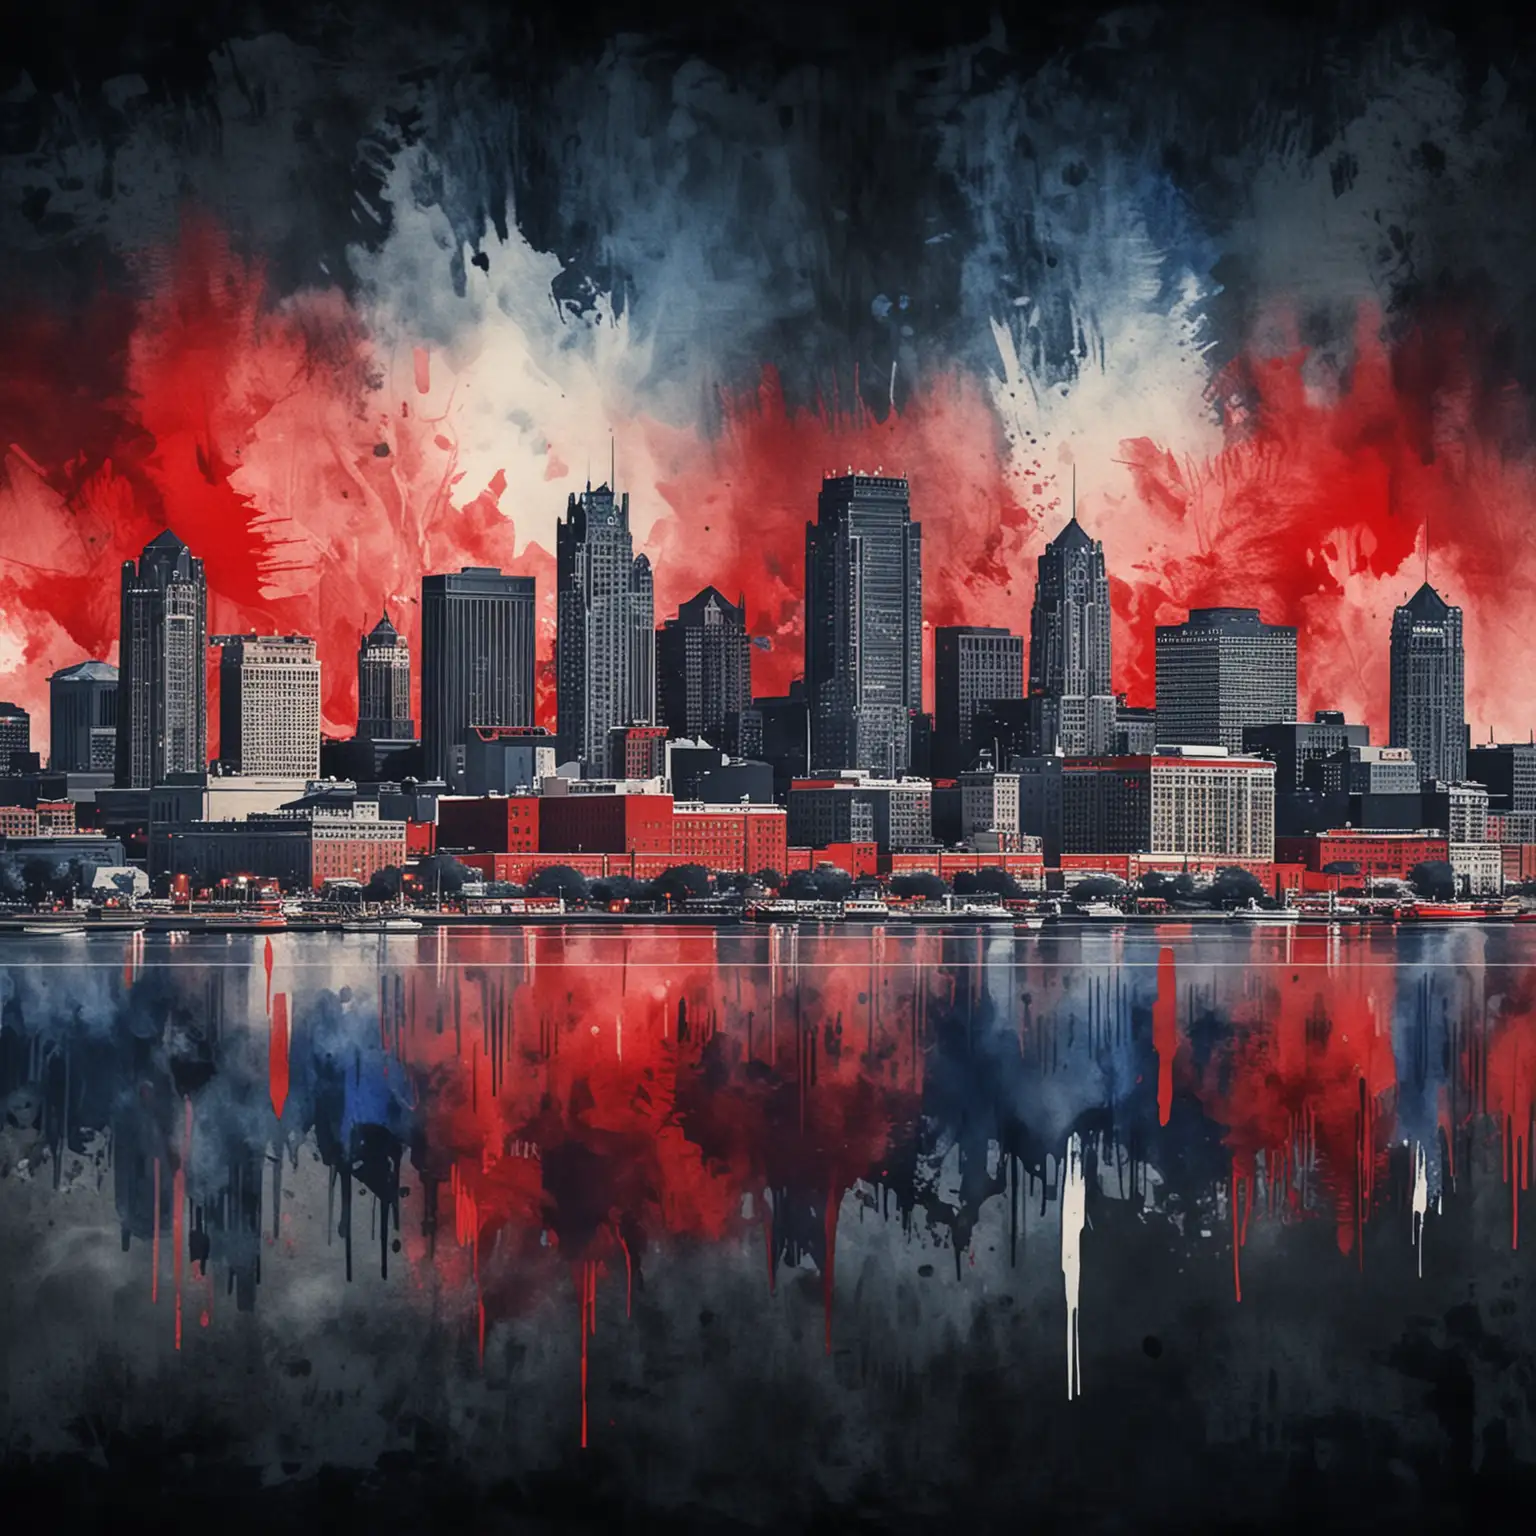 Milwaukee skyline with a vibrant red white and blue watercolor overlay on a dark background